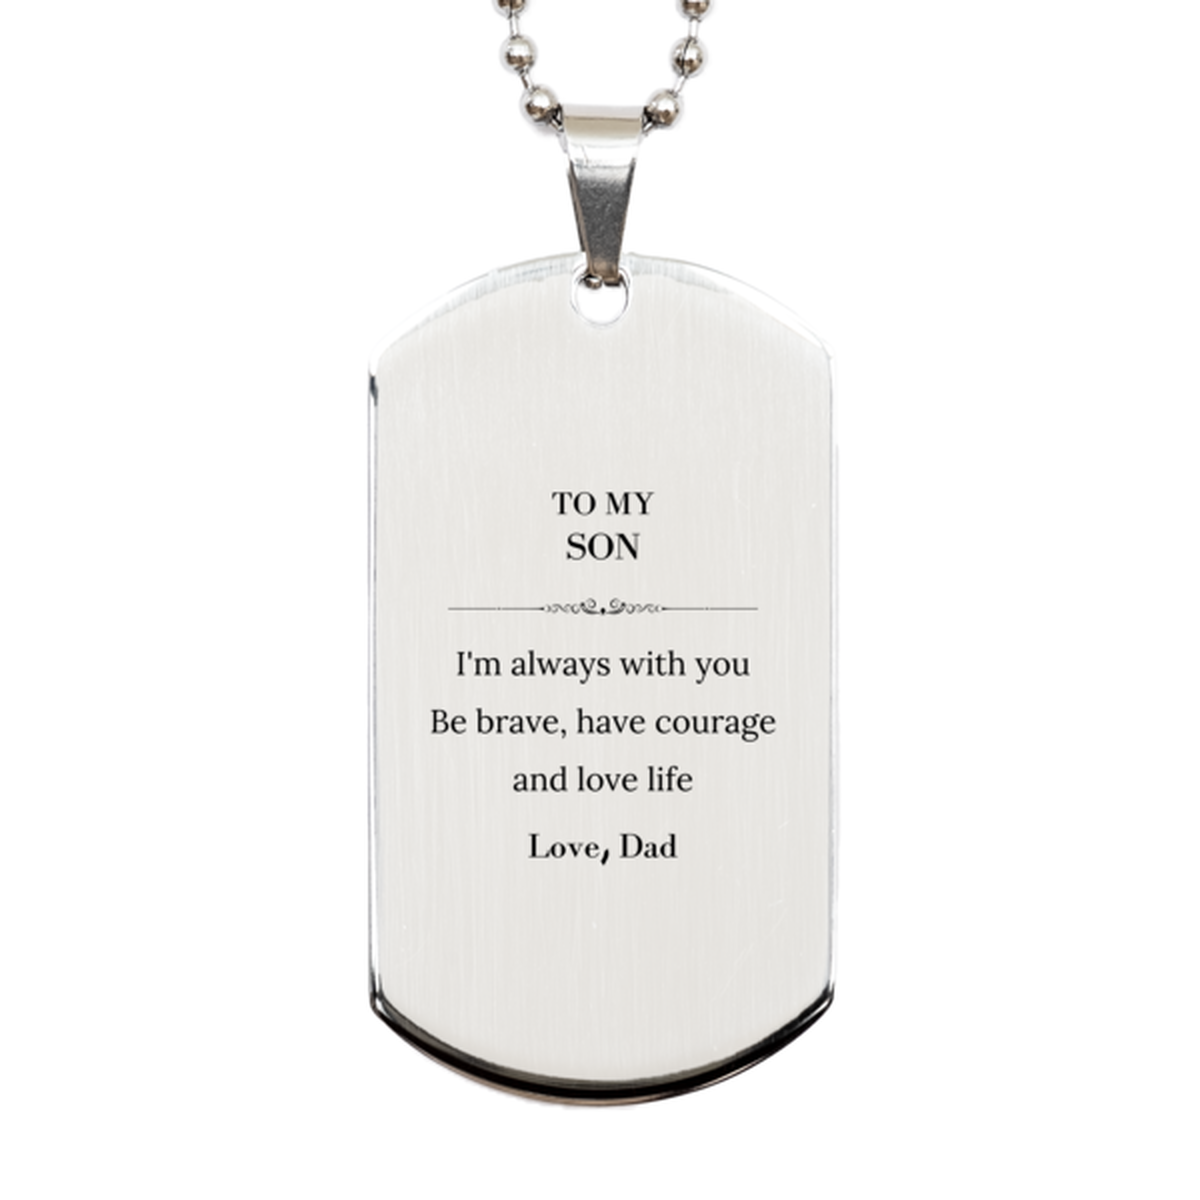 To My Son Gifts from Dad, Unique Silver Dog Tag Inspirational Christmas Birthday Graduation Gifts for Son I'm always with you. Be brave, have courage and love life. Love, Dad